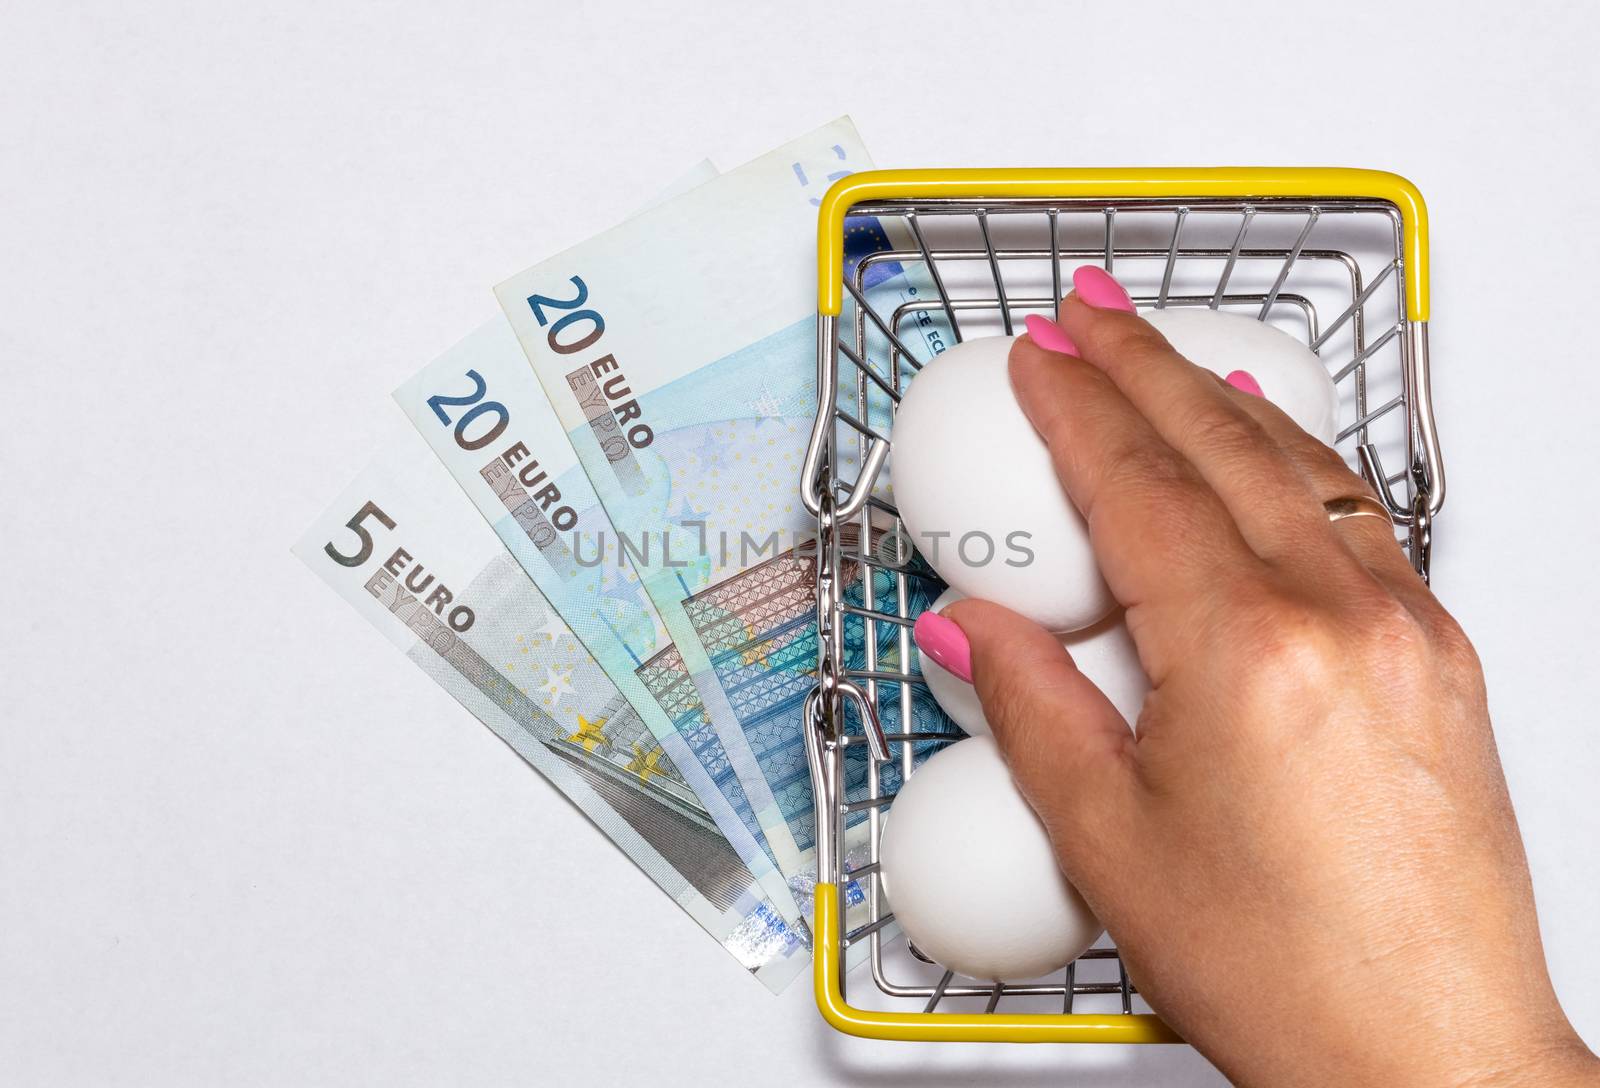 Fresh eggs in a shopping cart with various euro bills underneath it and womans hand reaching for eggs. Shopping, purchasing, and food delivery concept. by DamantisZ